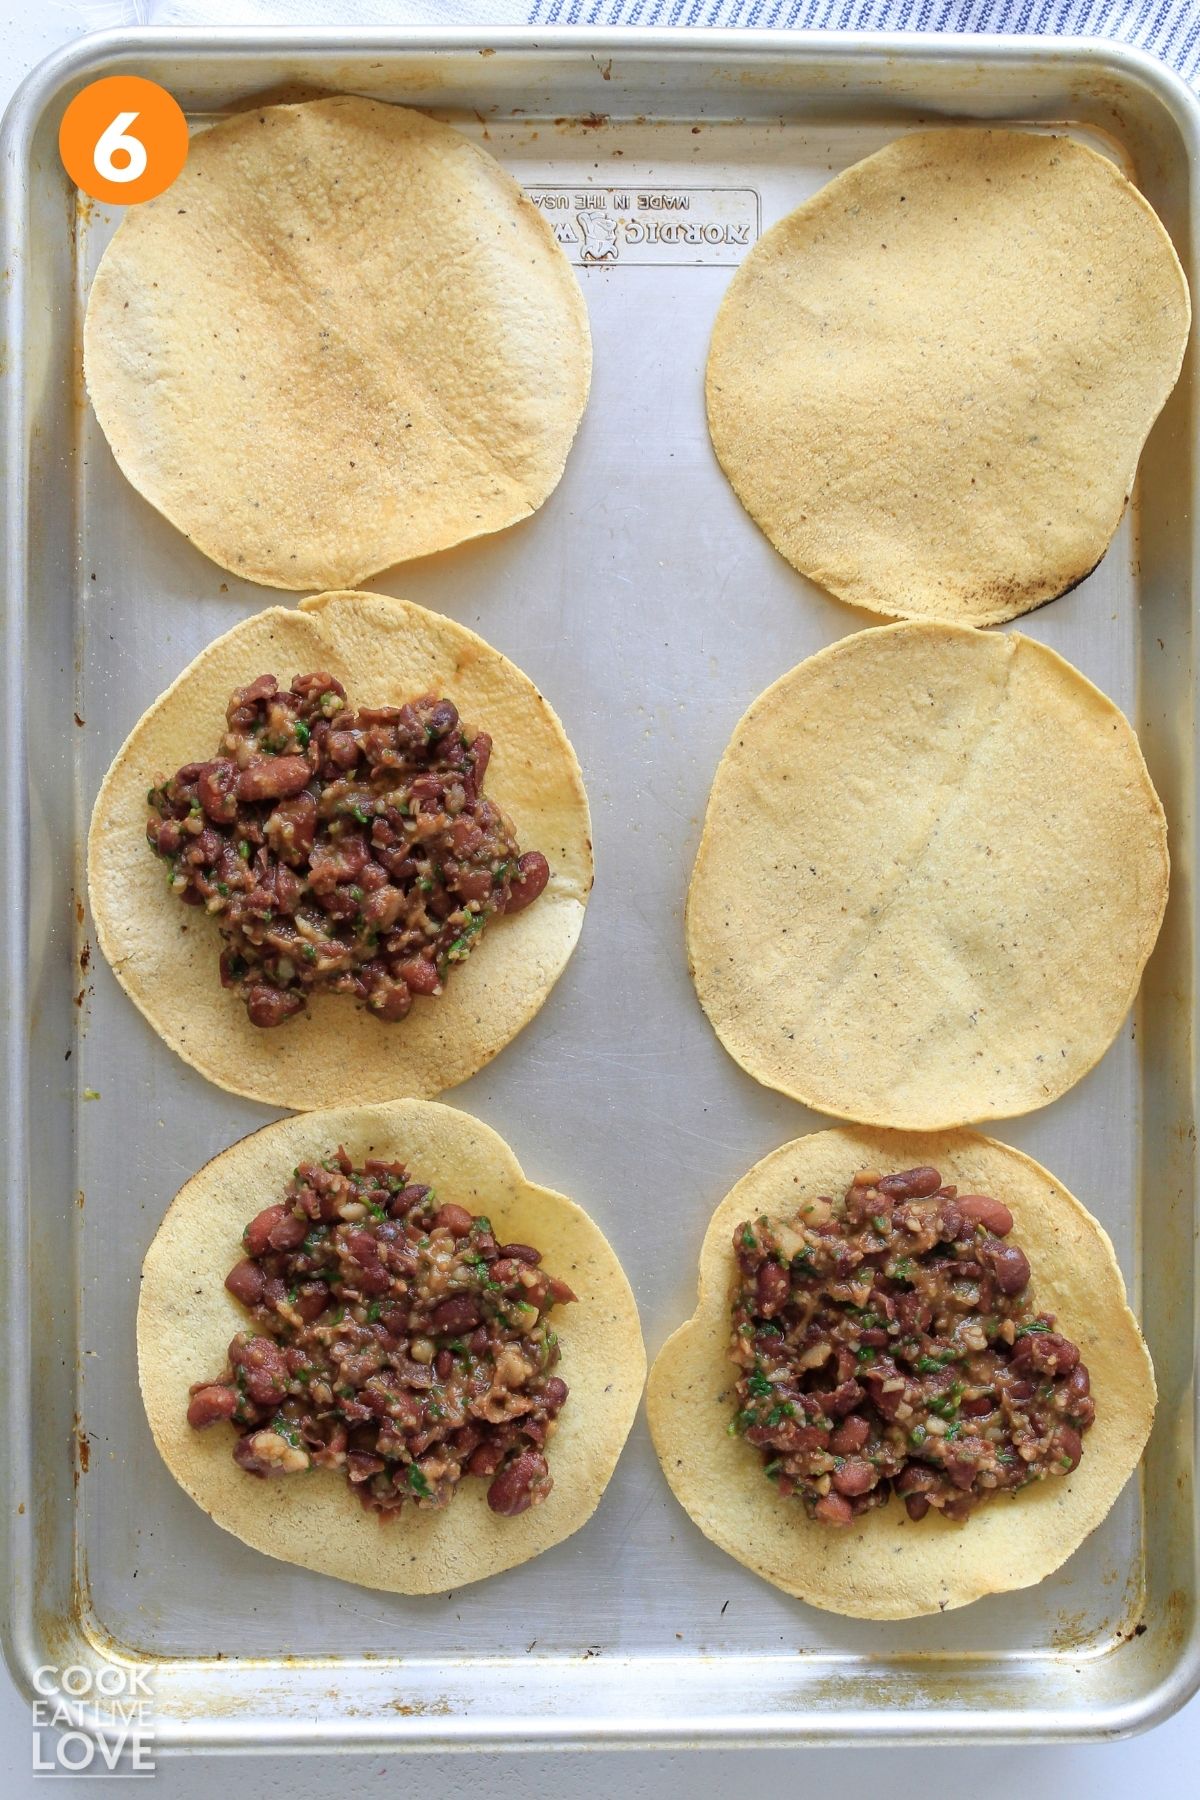 Baked tostadas topped with bean mixture.